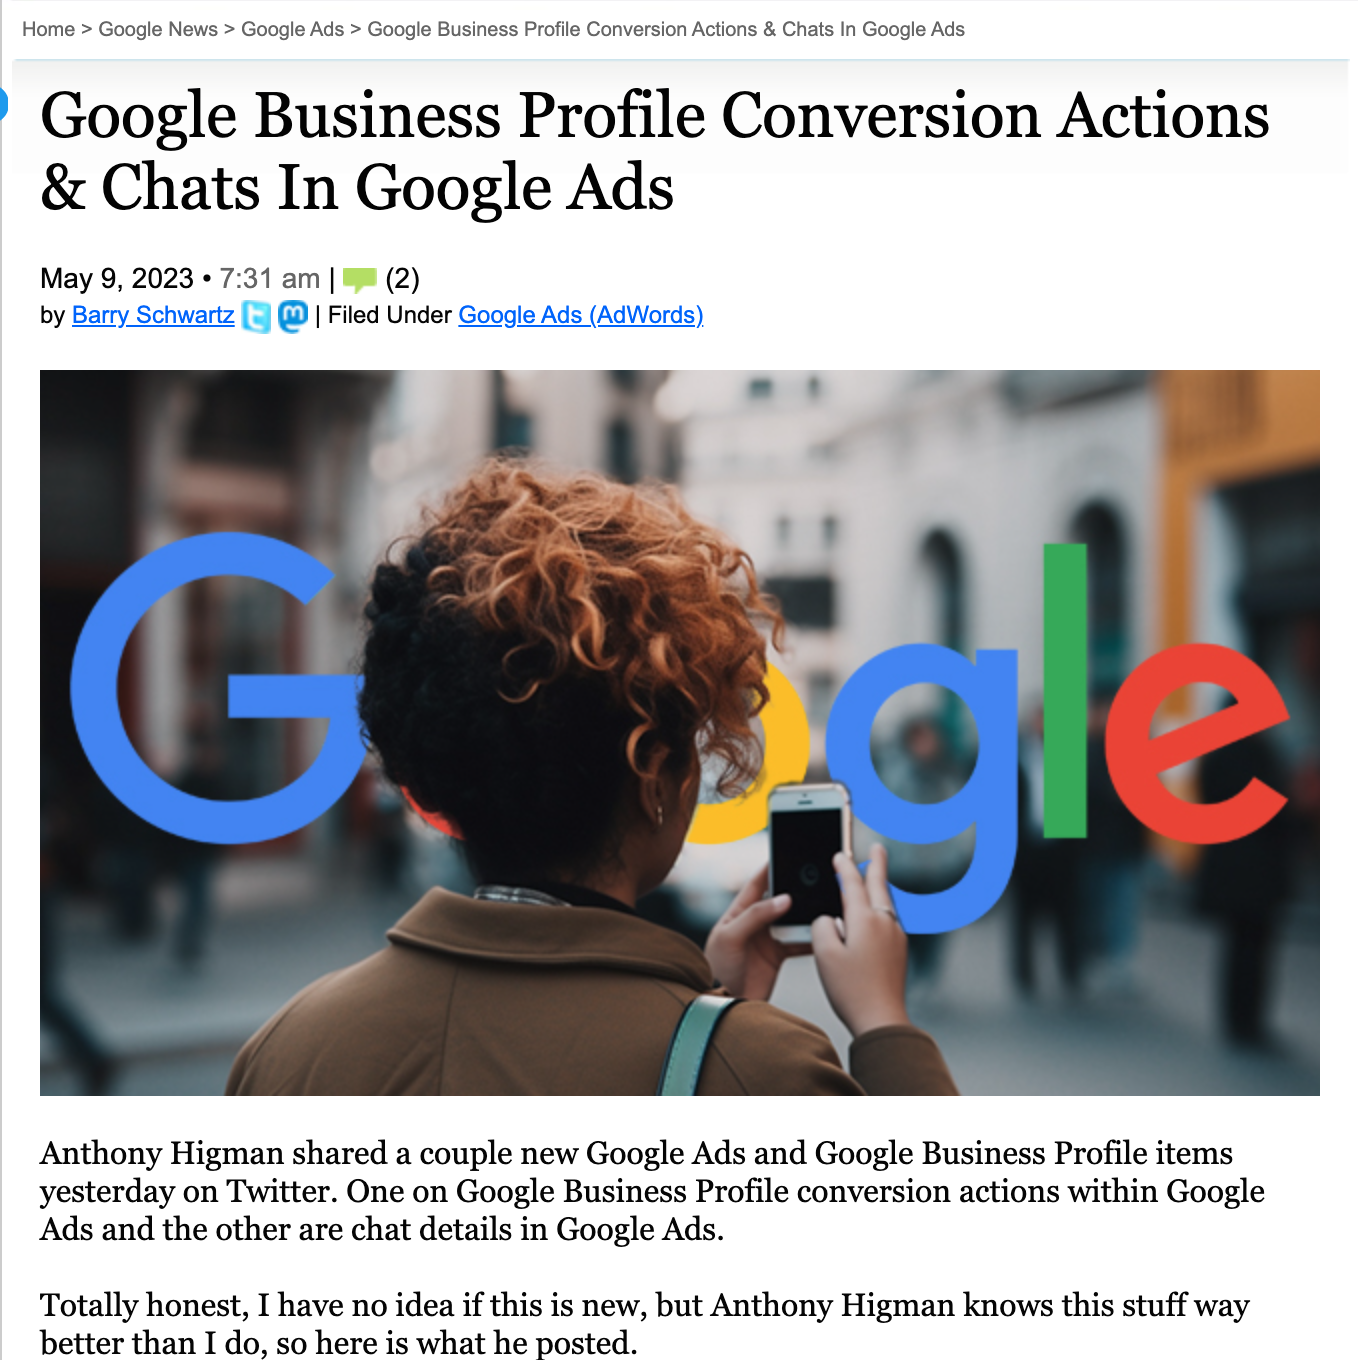 Google Business Profile Conversion Actions And Chats In Google Ads featured image